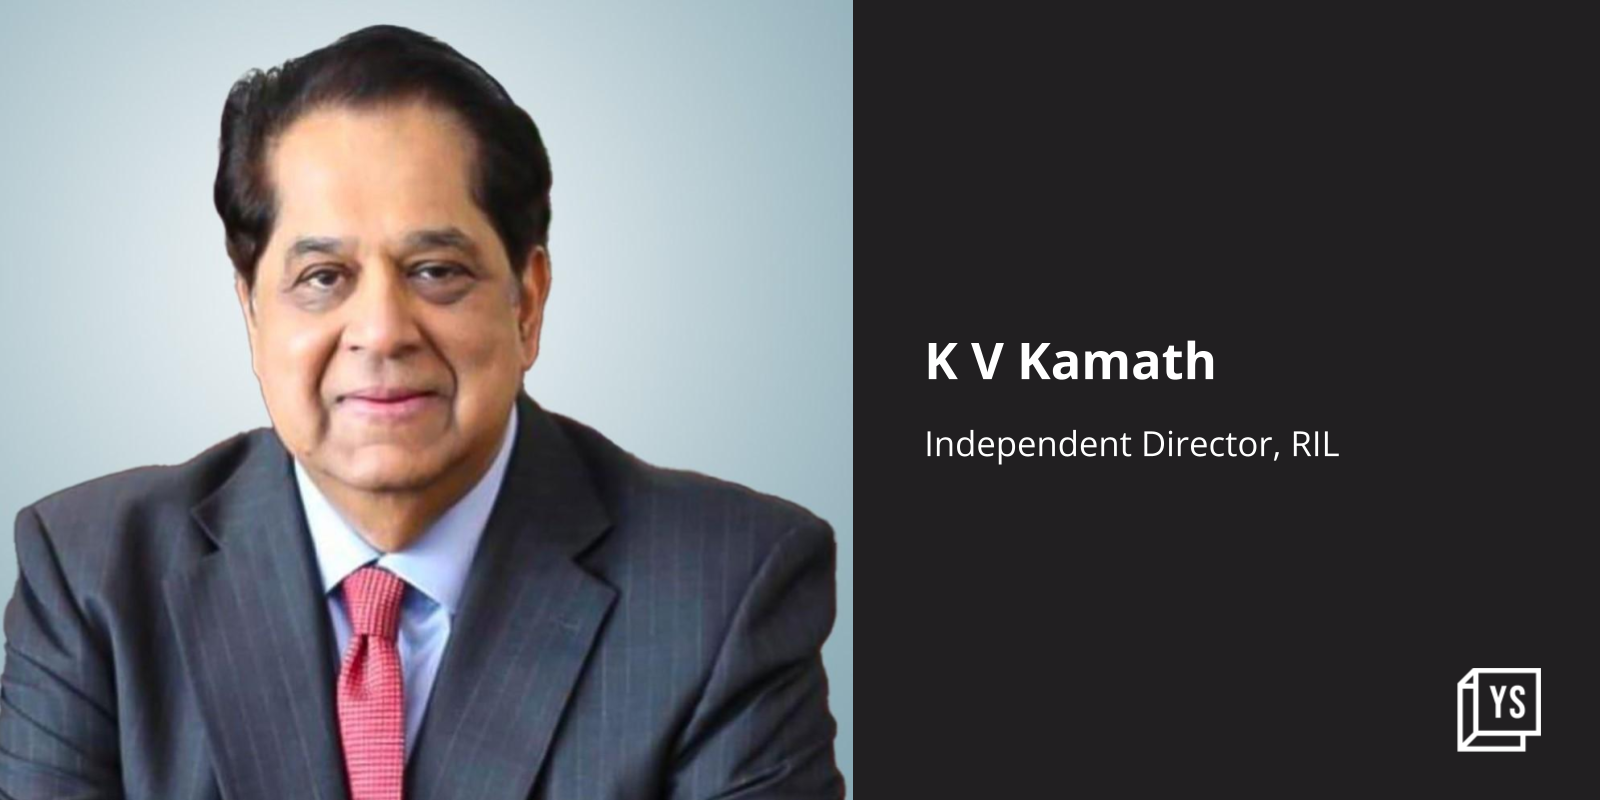 Reliance Industries appoints K V Kamath as independent director

